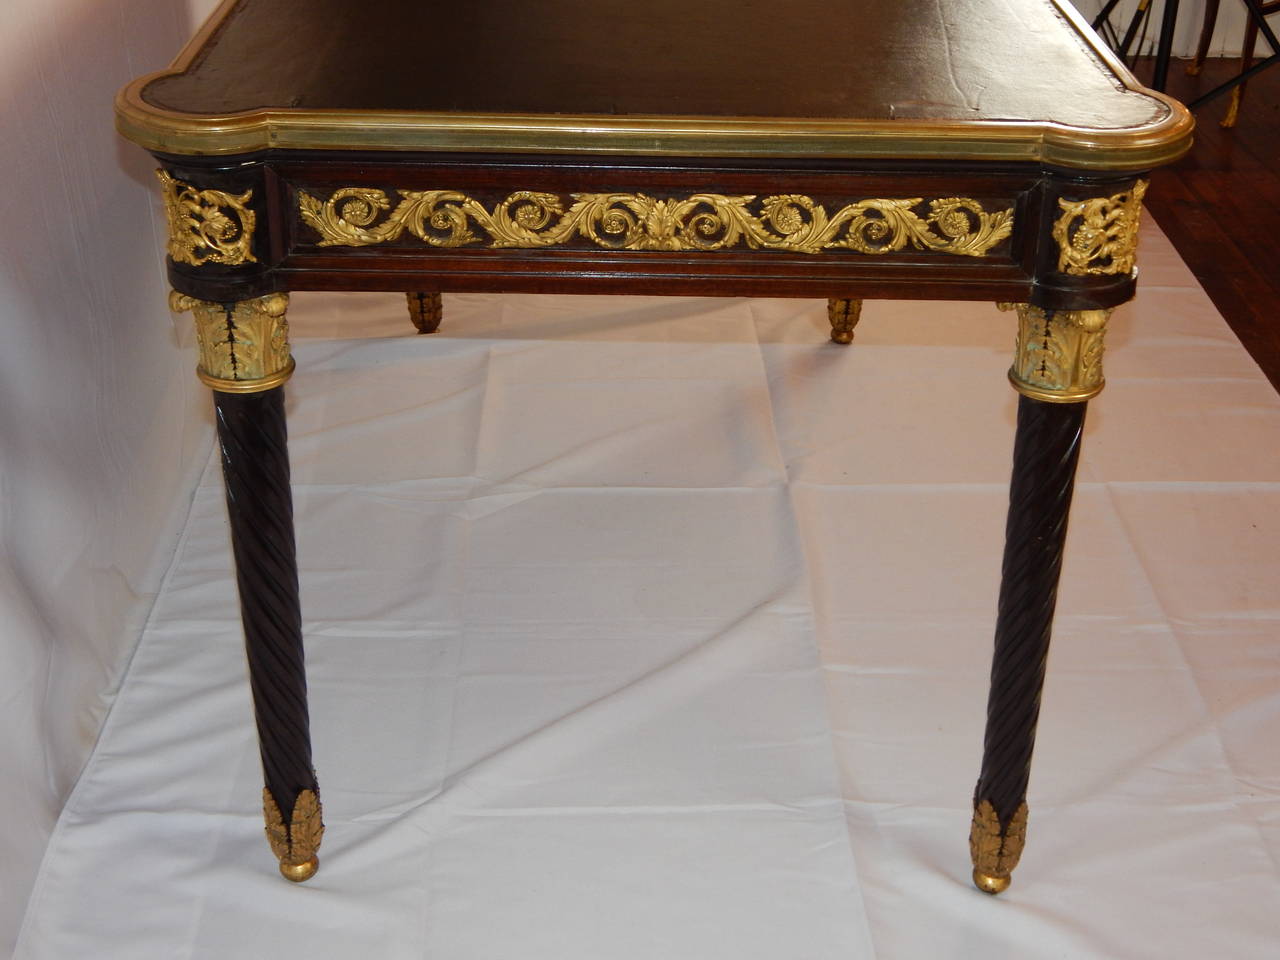 A fine quality Louis XVI style bronze mounted writing table, or bureau plat, with a single long drawer, rope turned legs, and leather top.